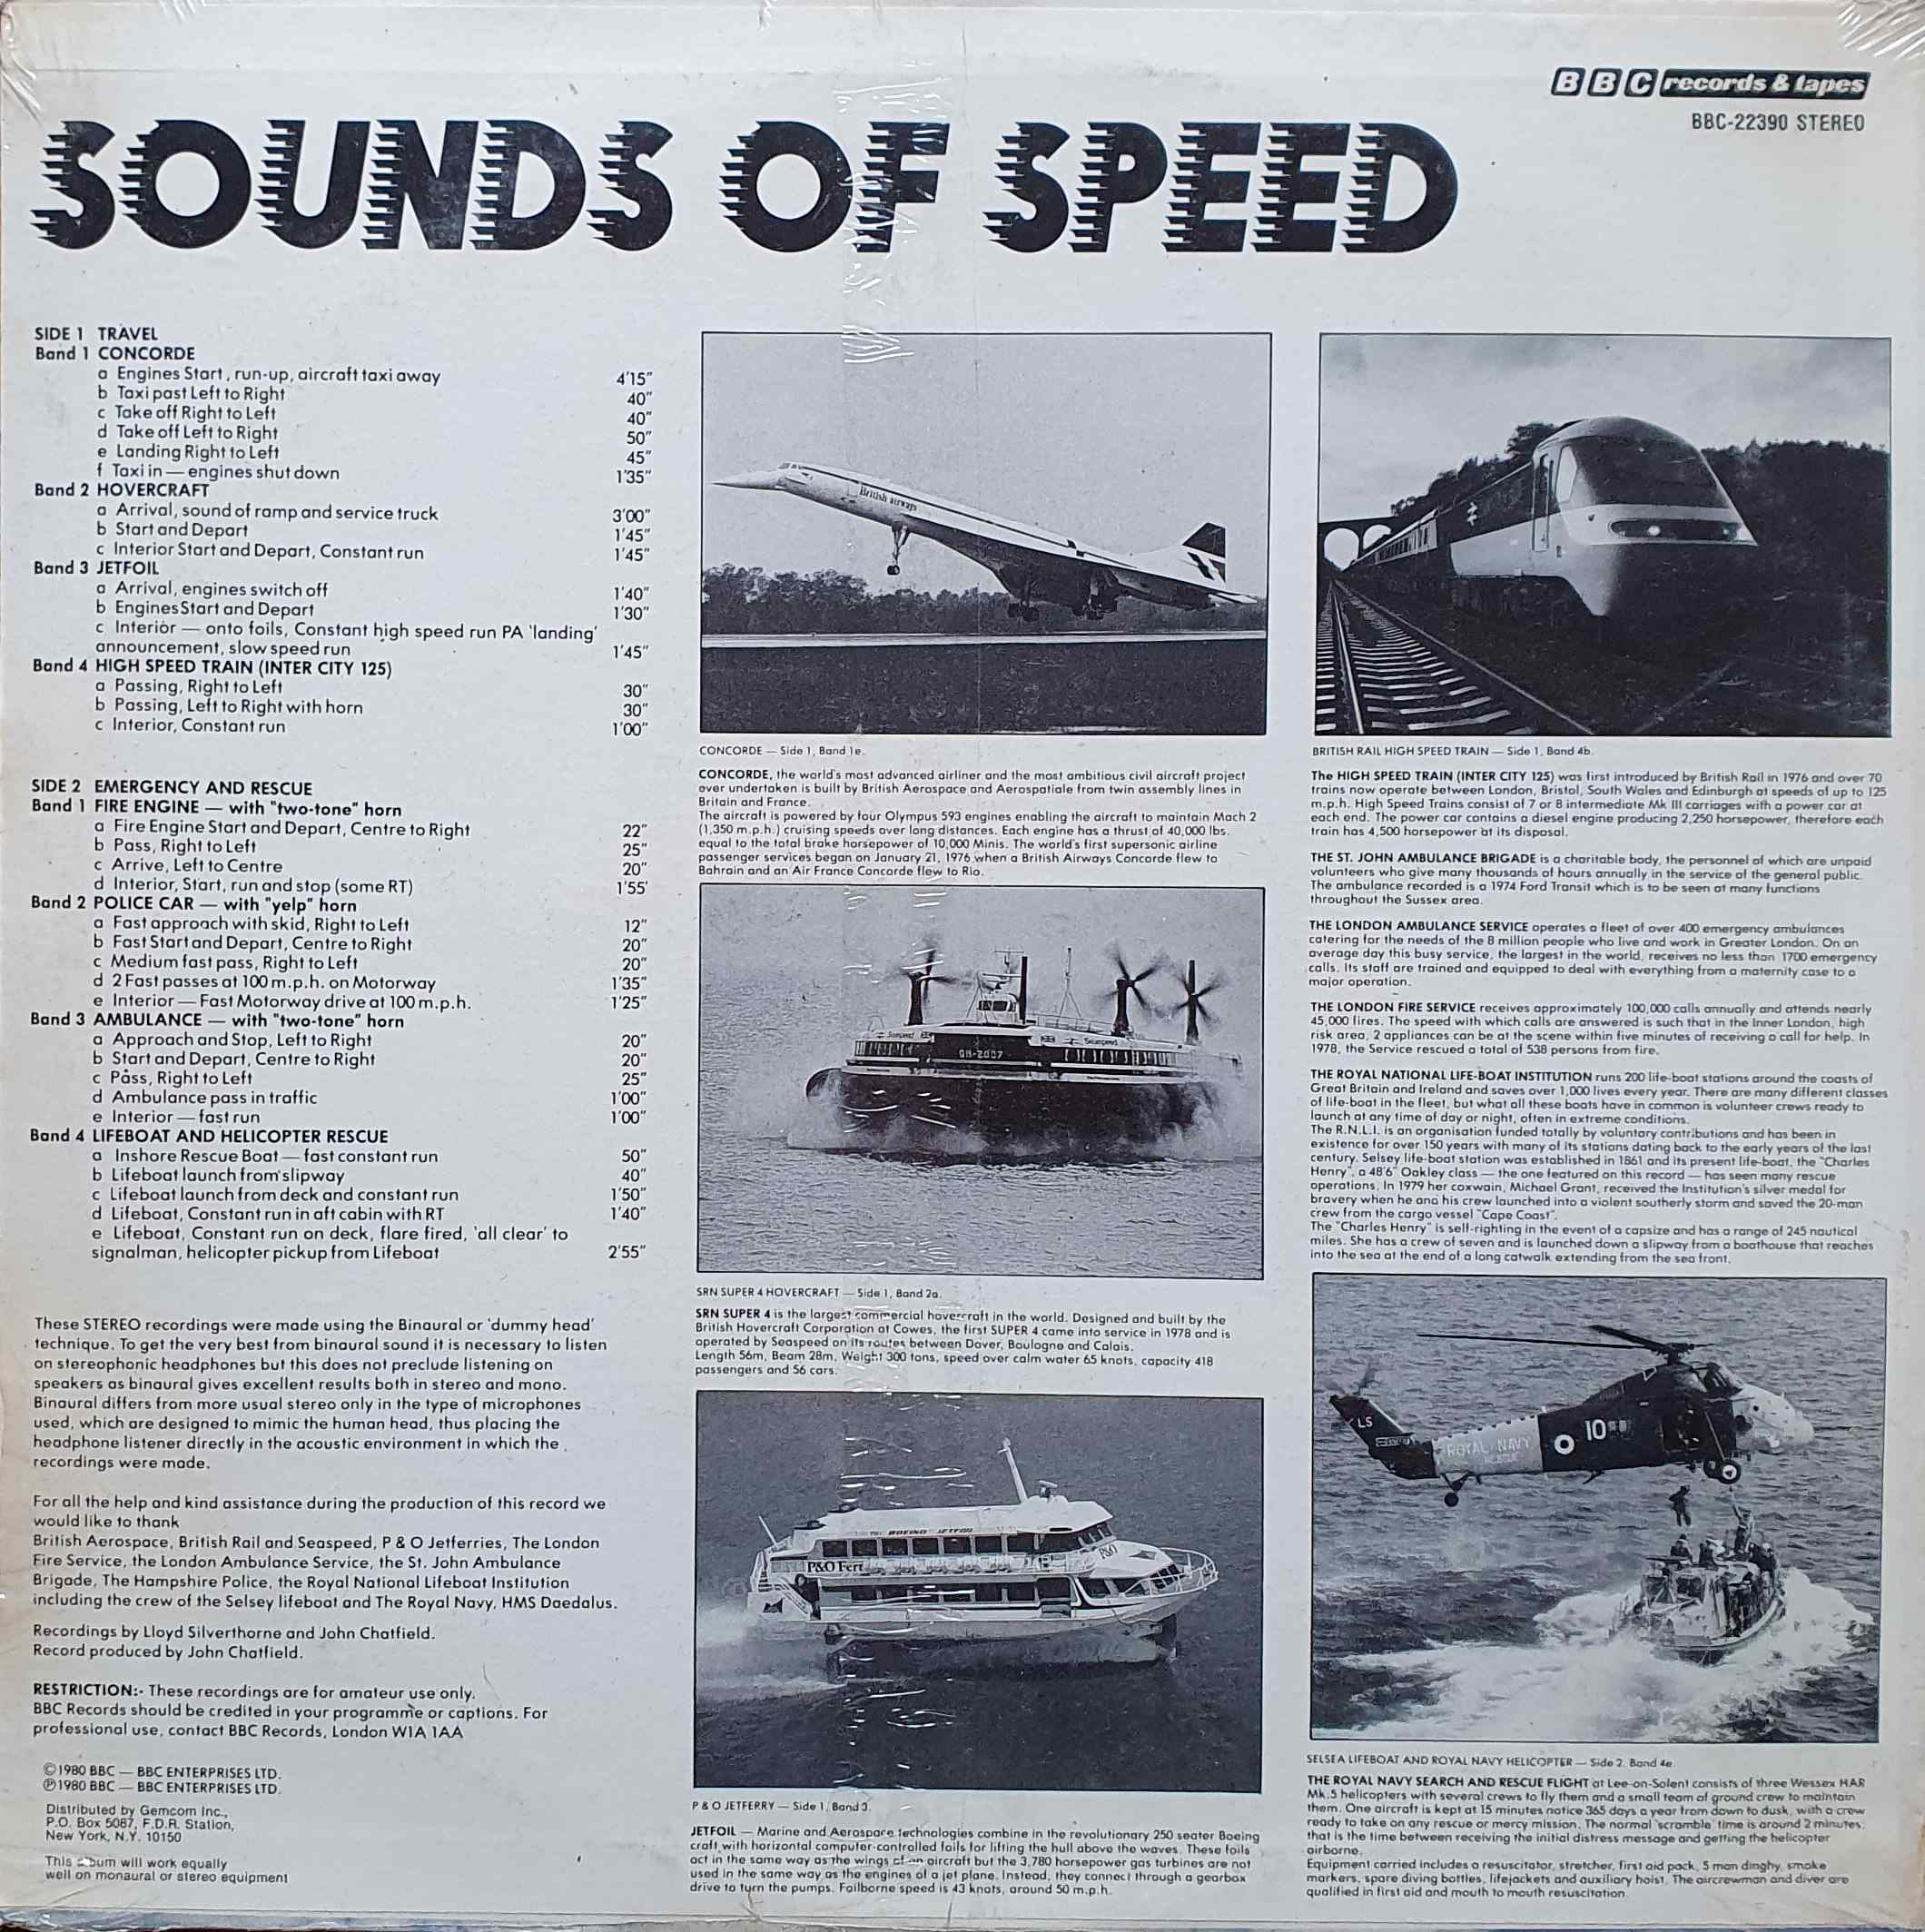 Picture of BBC - 22390 Sounds of speed by artist Various from the BBC records and Tapes library